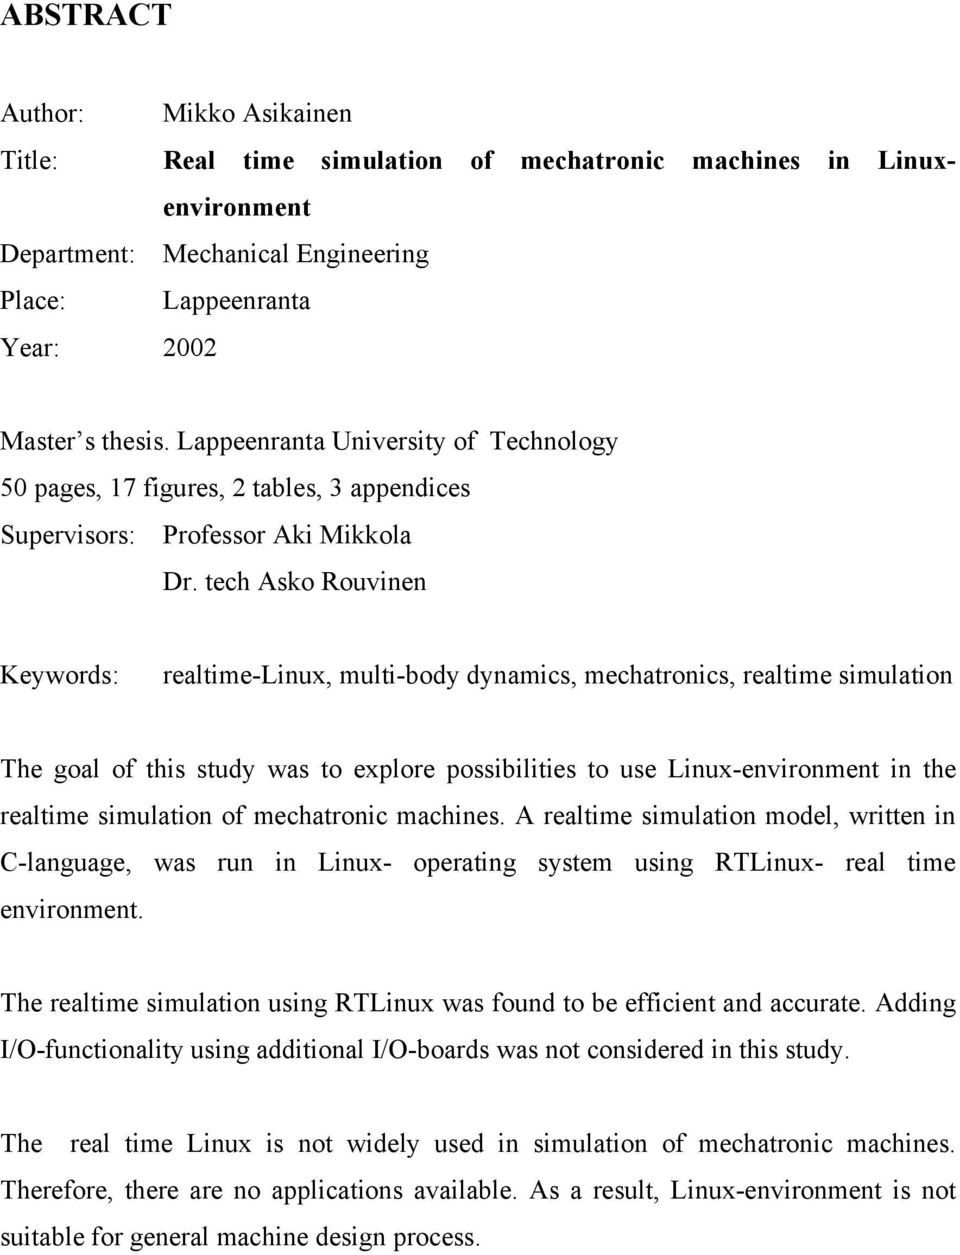 tech sko Rouvnen Keywords: realtme-lnux, mult-body dynamcs, mechatroncs, realtme smulaton The goal of ths study was to explore possbltes to use Lnux-envronment n the realtme smulaton of mechatronc